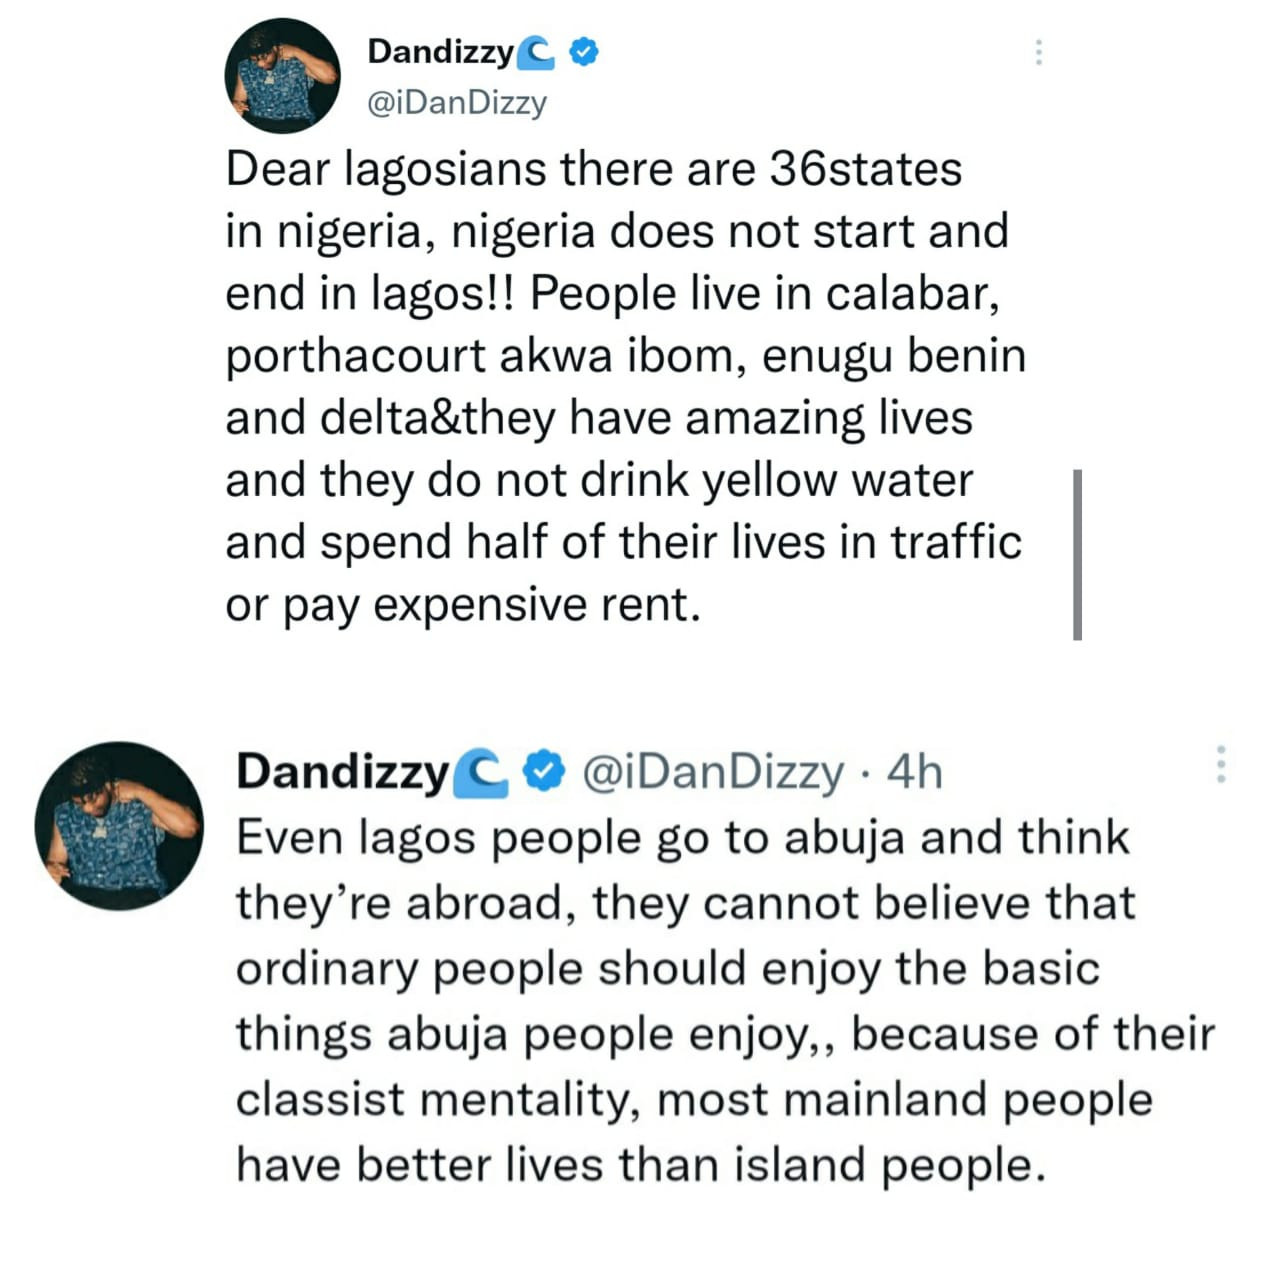 Dandizzy Criticizes Lagos Residents For Classism, Yours Truly, News, May 29, 2023